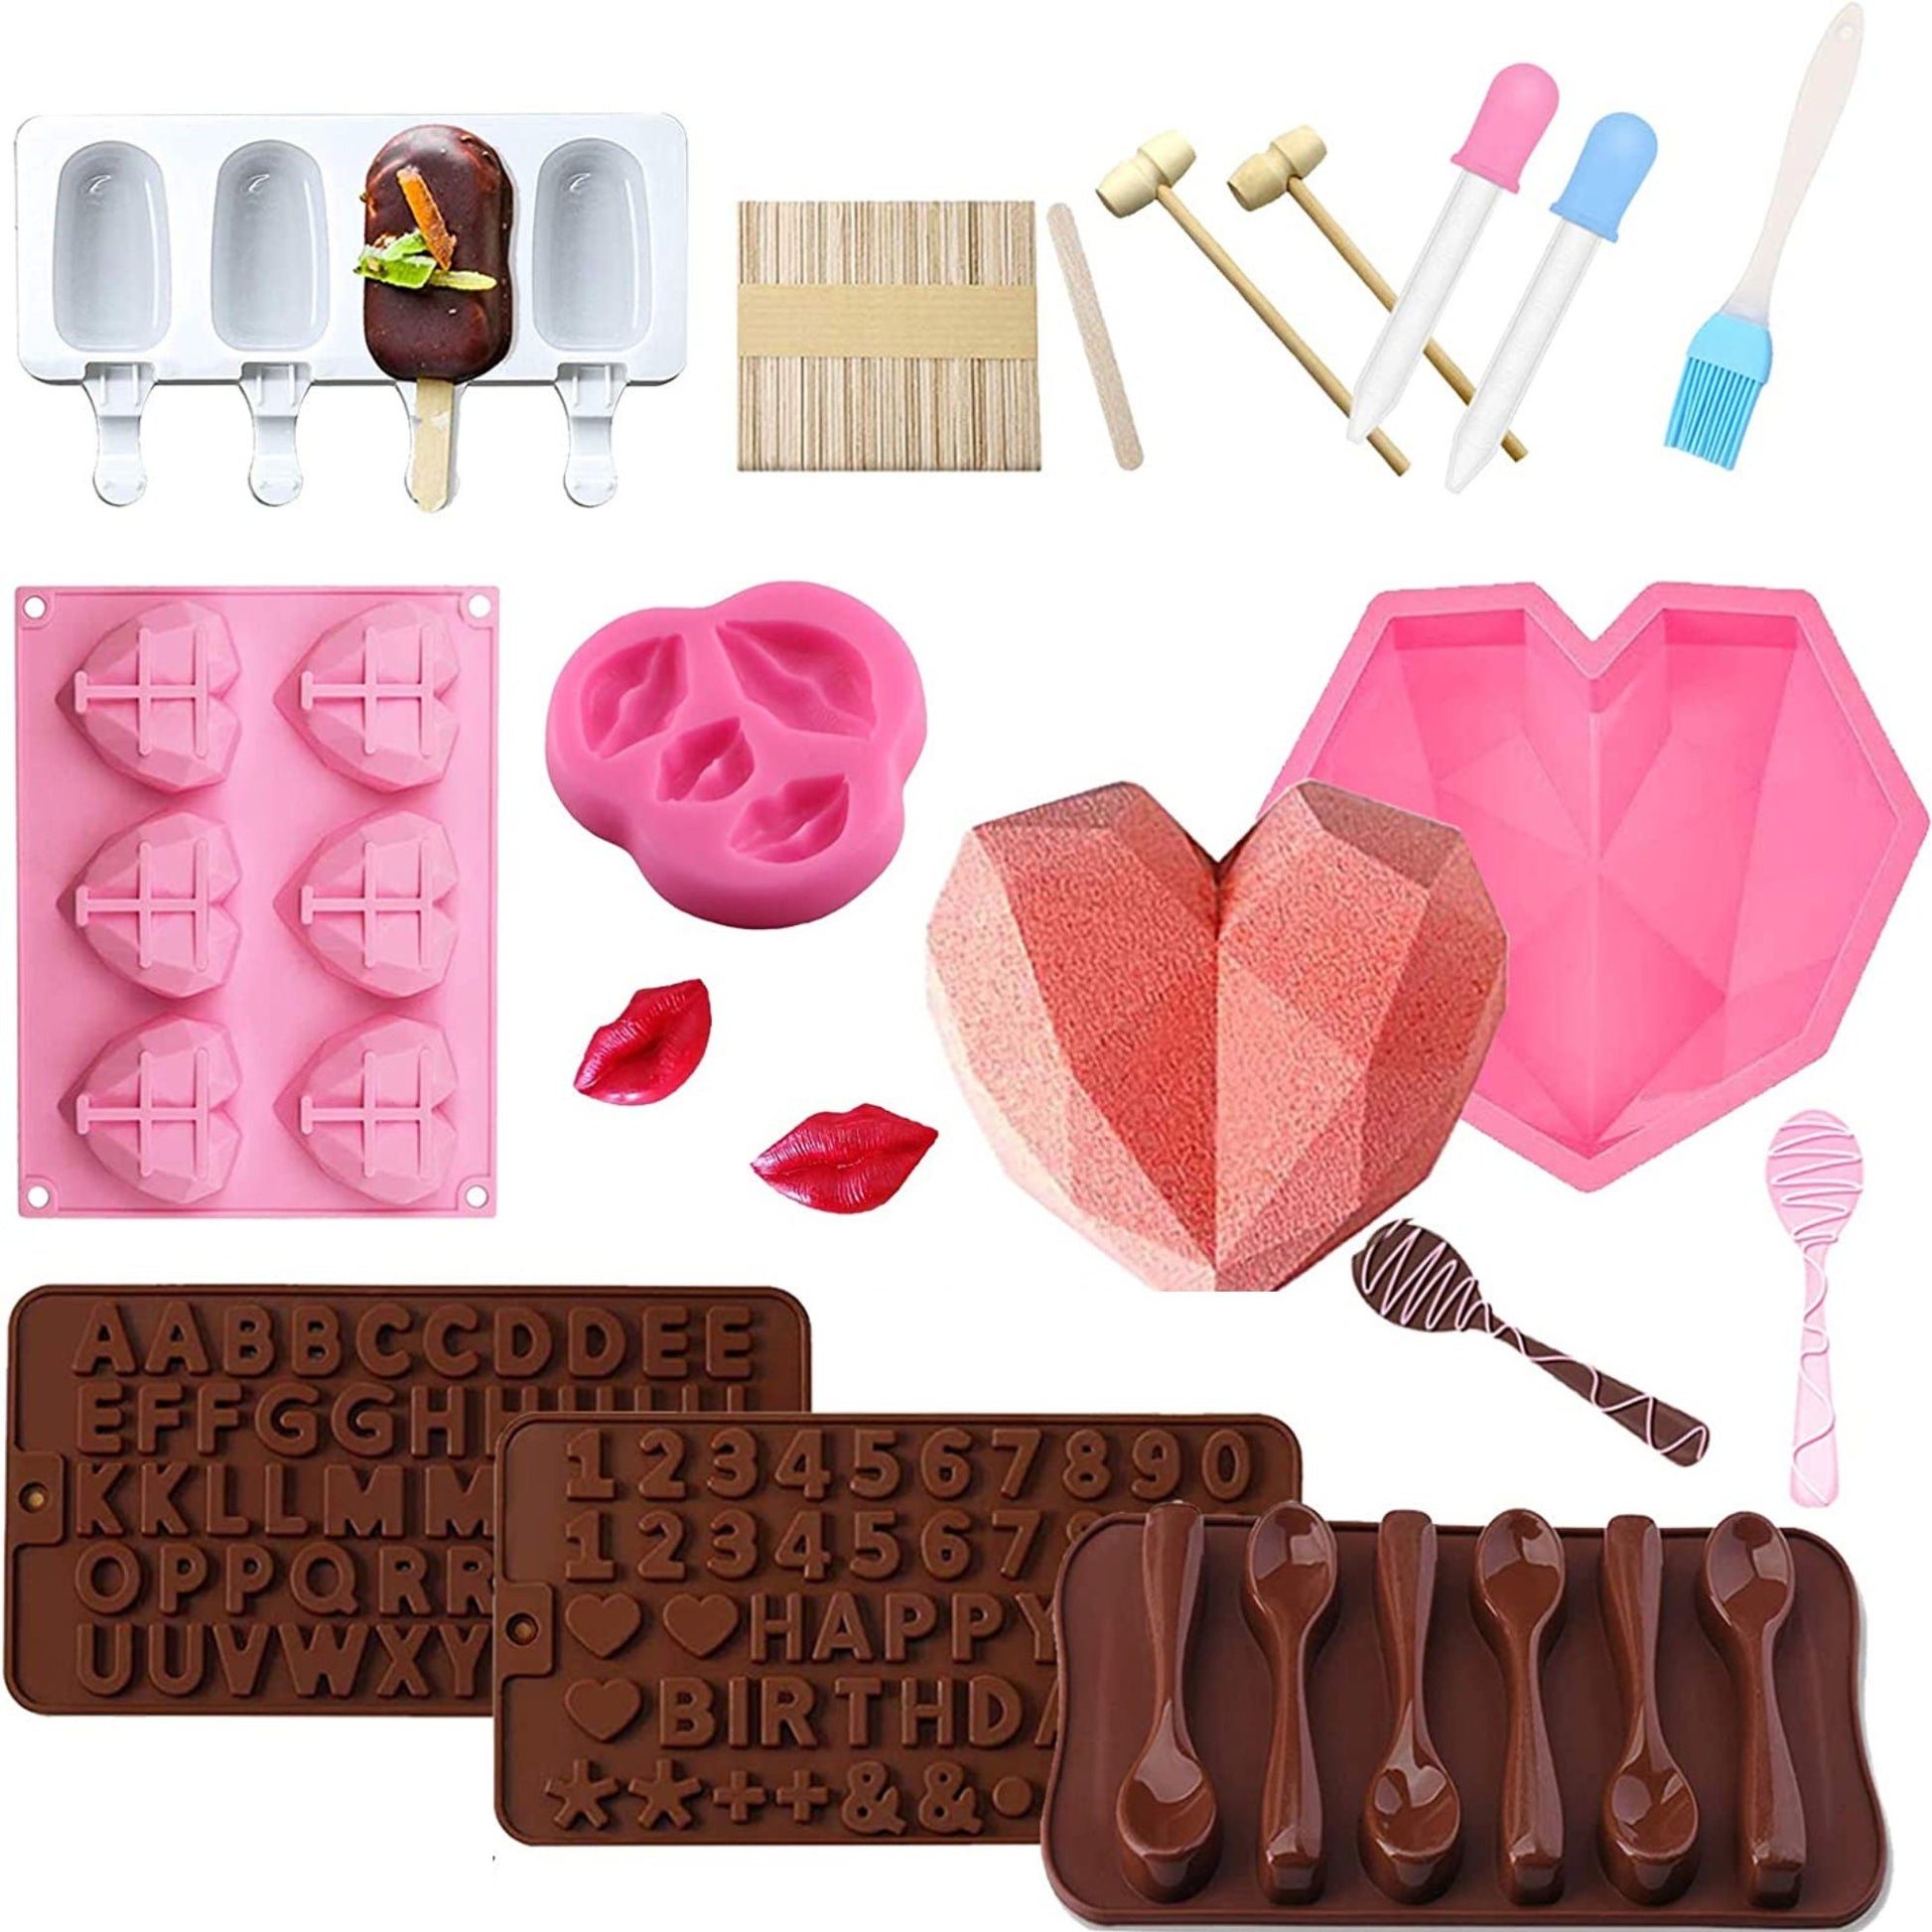 Breakable Heart Mold-Diamond Heart Silicone for Chocolate Smash Hearts &  Hot Cocoa Bombs-Large 8 x 6 in- Includes Chocolate Mold Recipe